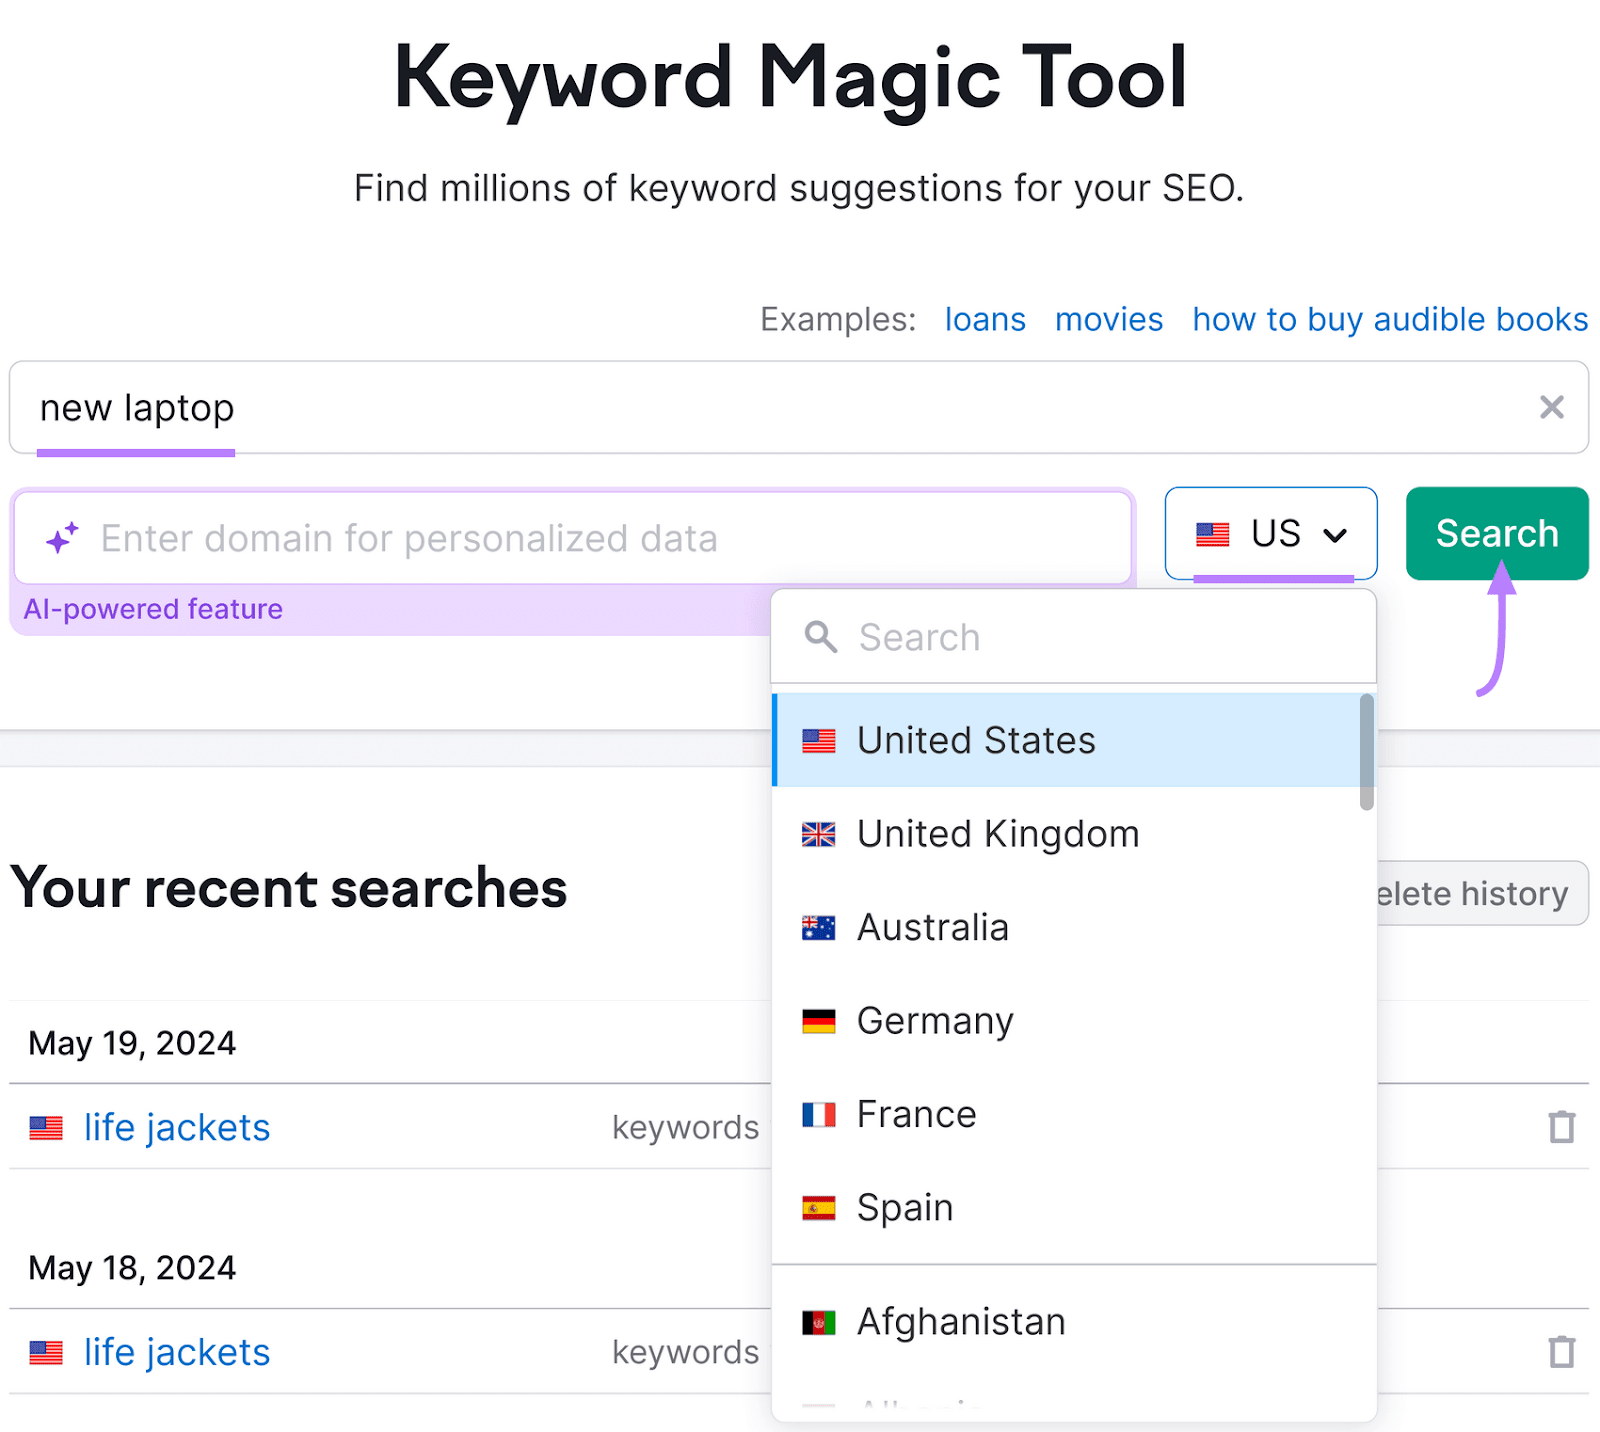 Keyword Magic Tool with a search bar where "new laptop" is typed, country selection drop-down, and a green "Search" button.